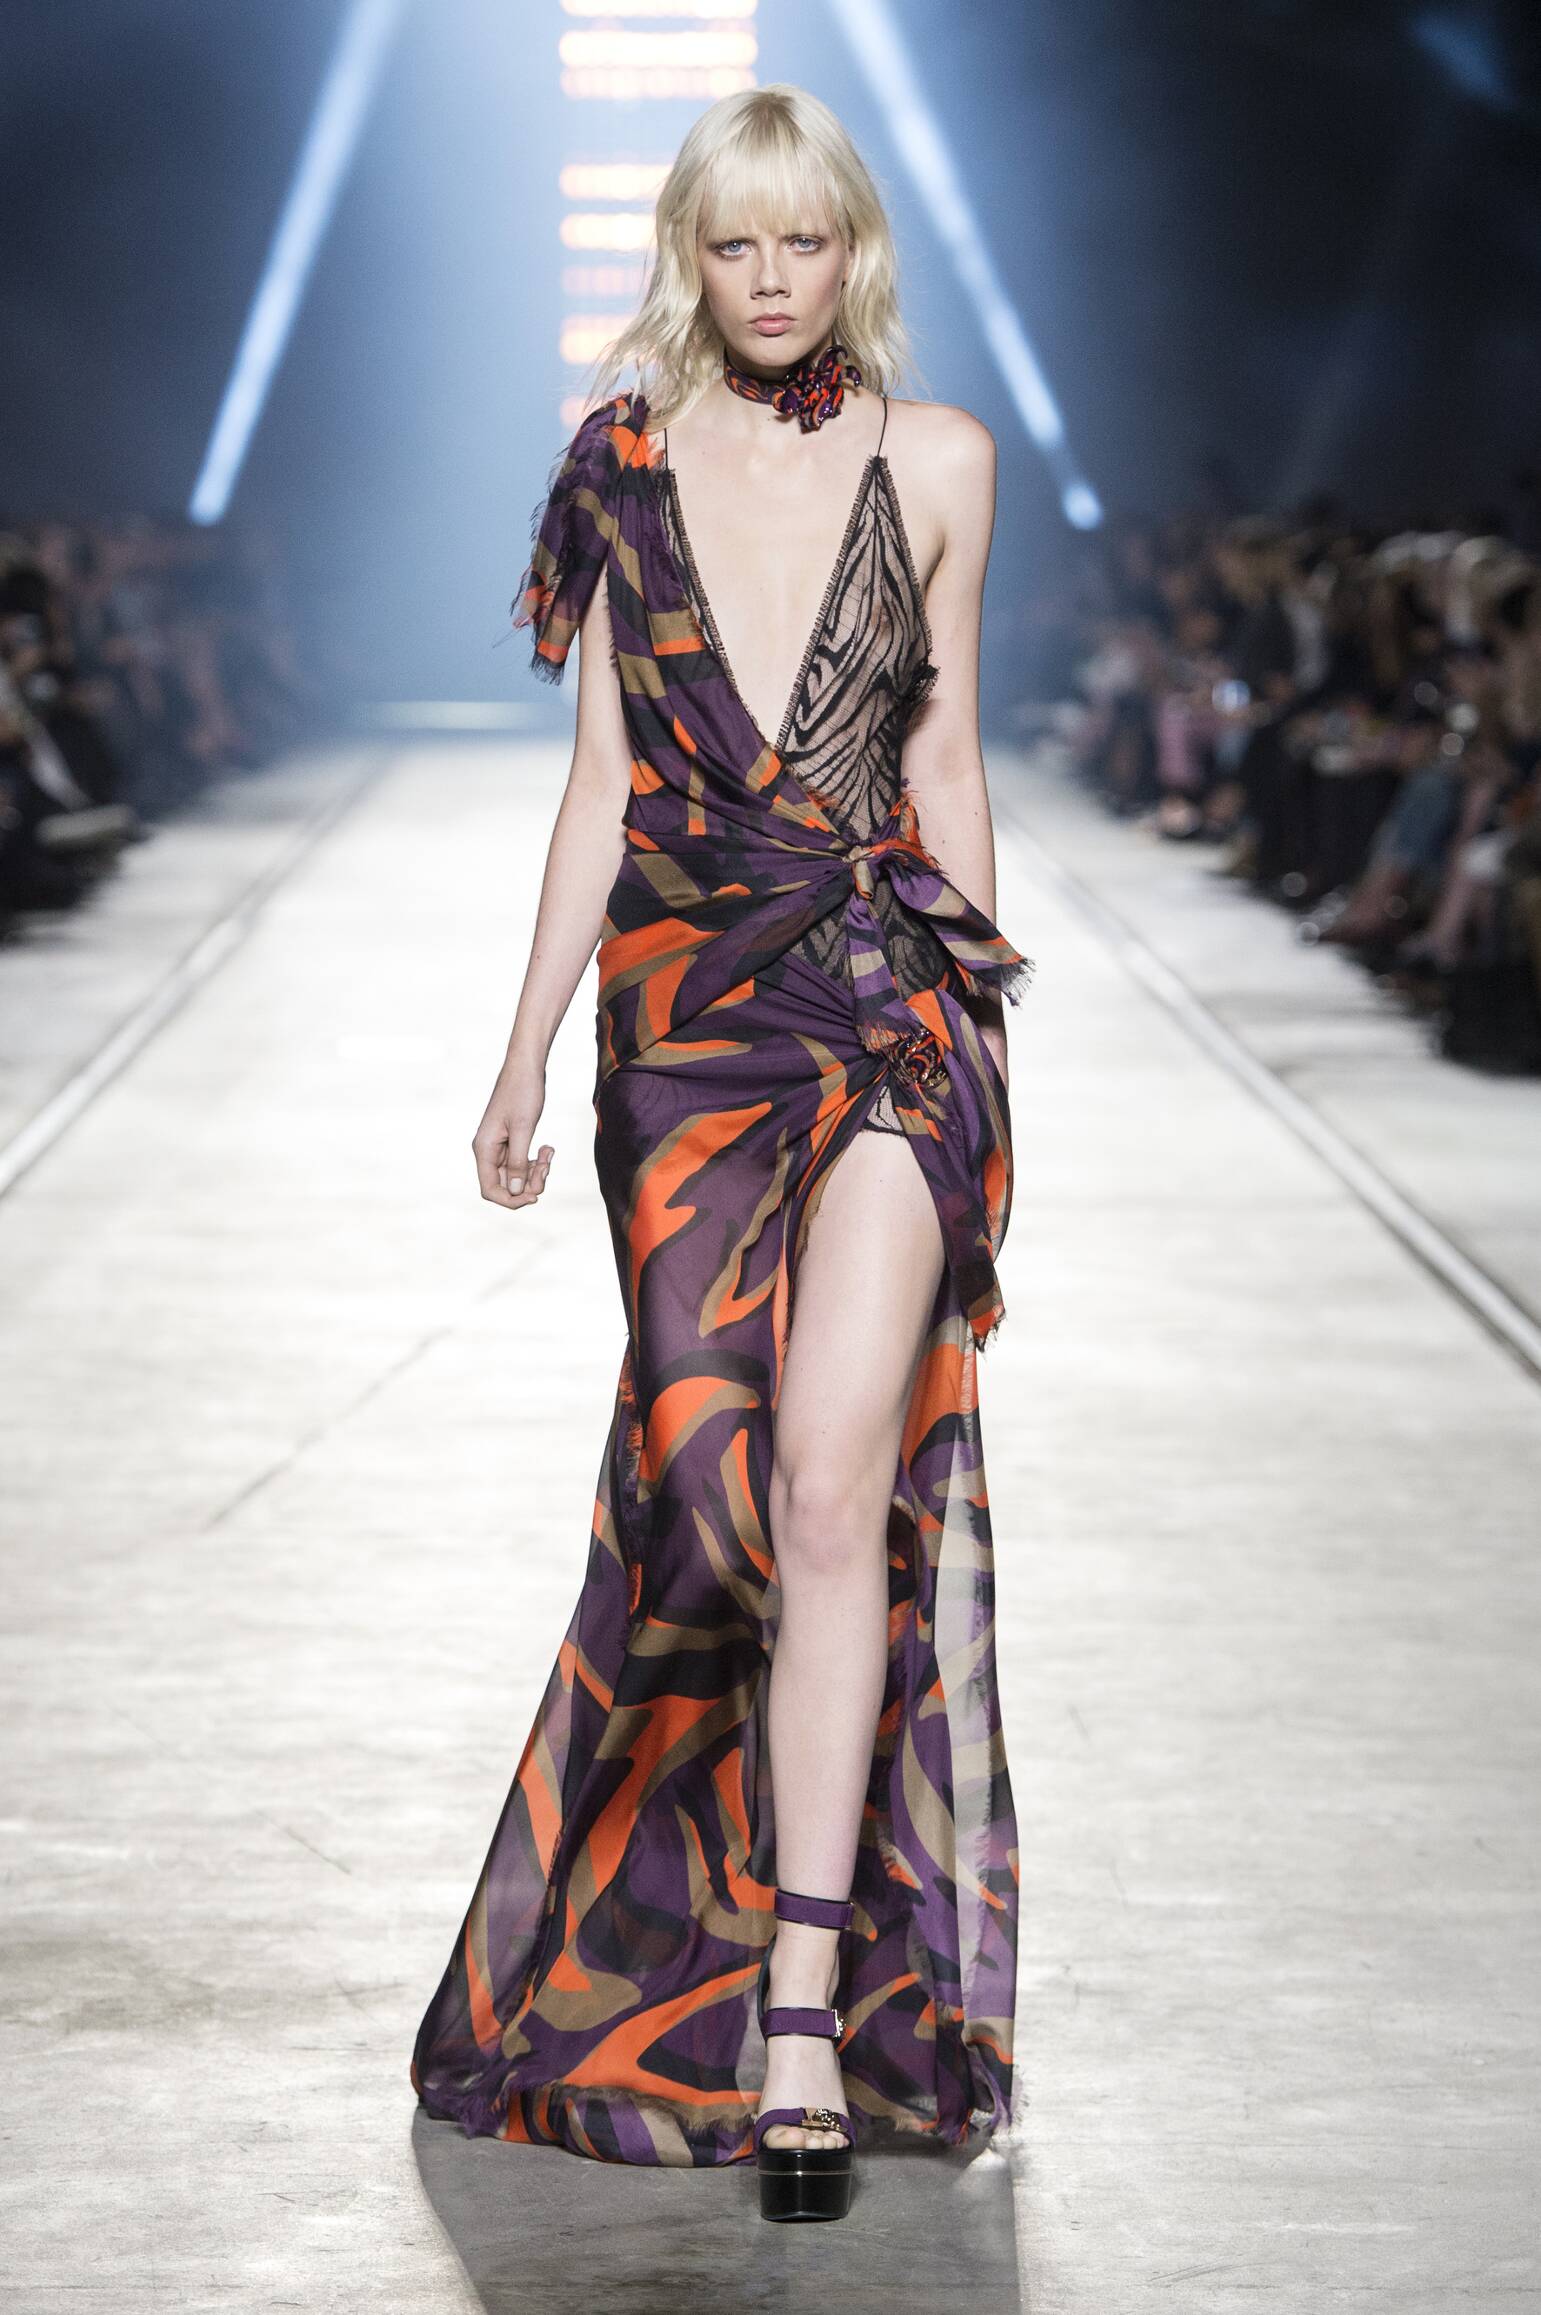 VERSACE SPRING SUMMER 2016 WOMEN'S COLLECTION | The Skinny Beep